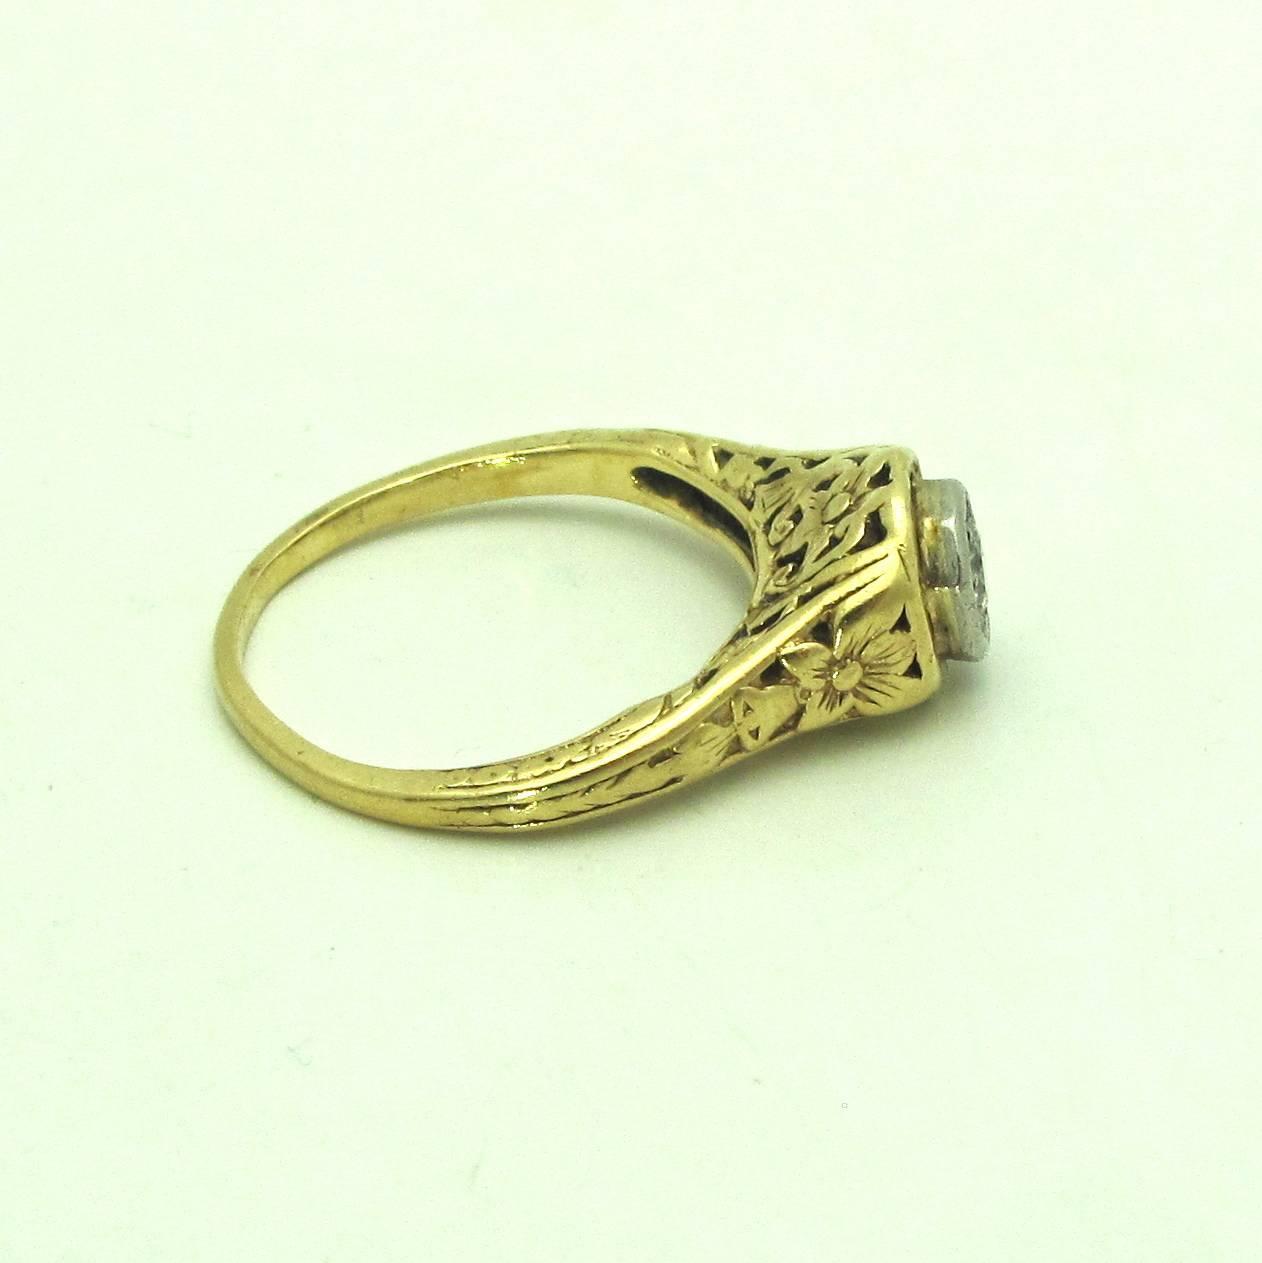  Engraved  Diamond Gold Engagement  Ring  For Sale  at 1stdibs